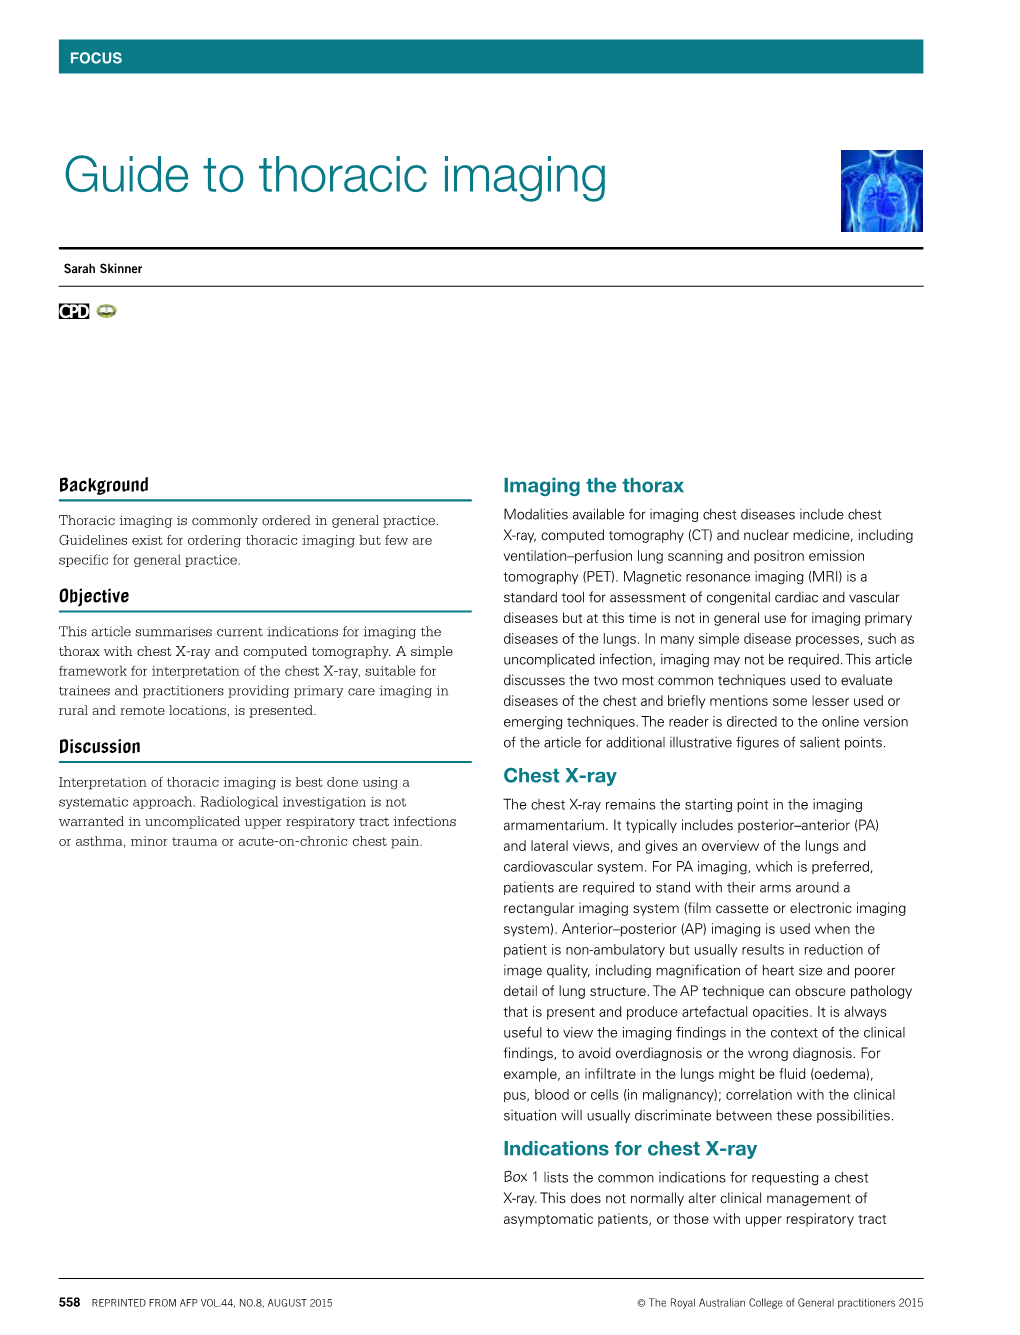 Guide to Thoracic Imaging